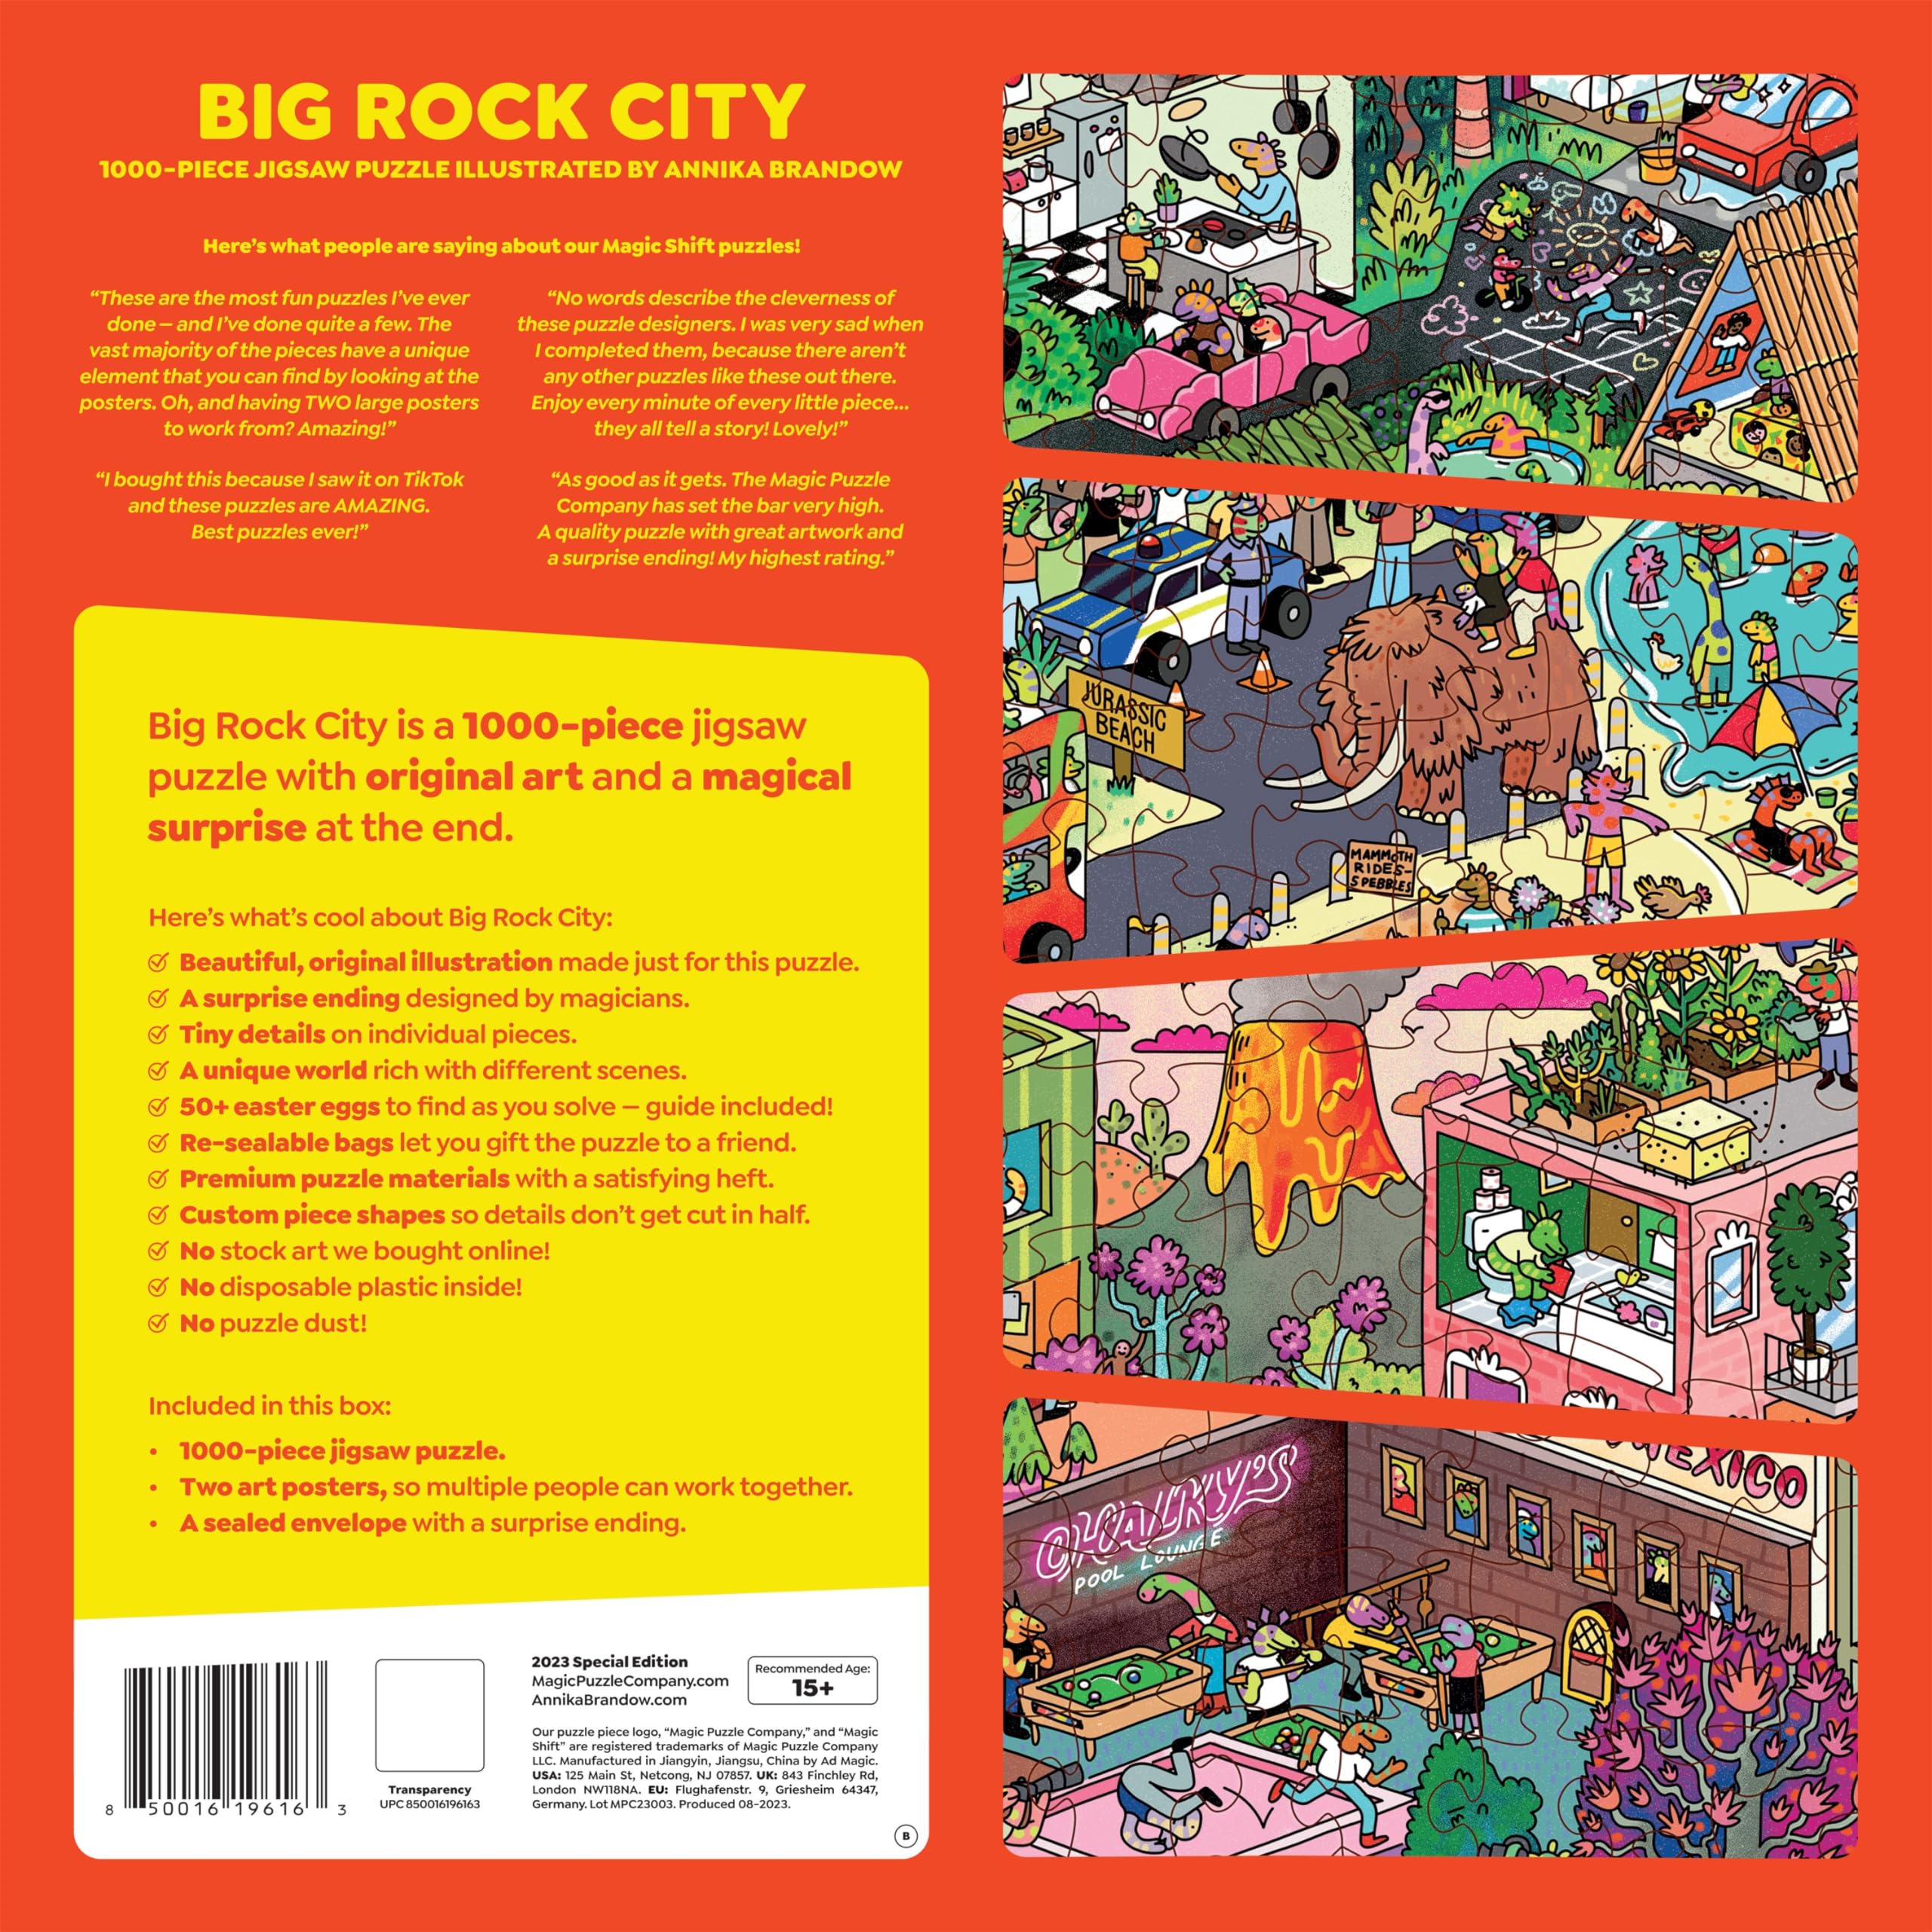 Big Rock City • 1000-Piece Jigsaw Puzzle from The Magic Puzzle Company • Special Edition